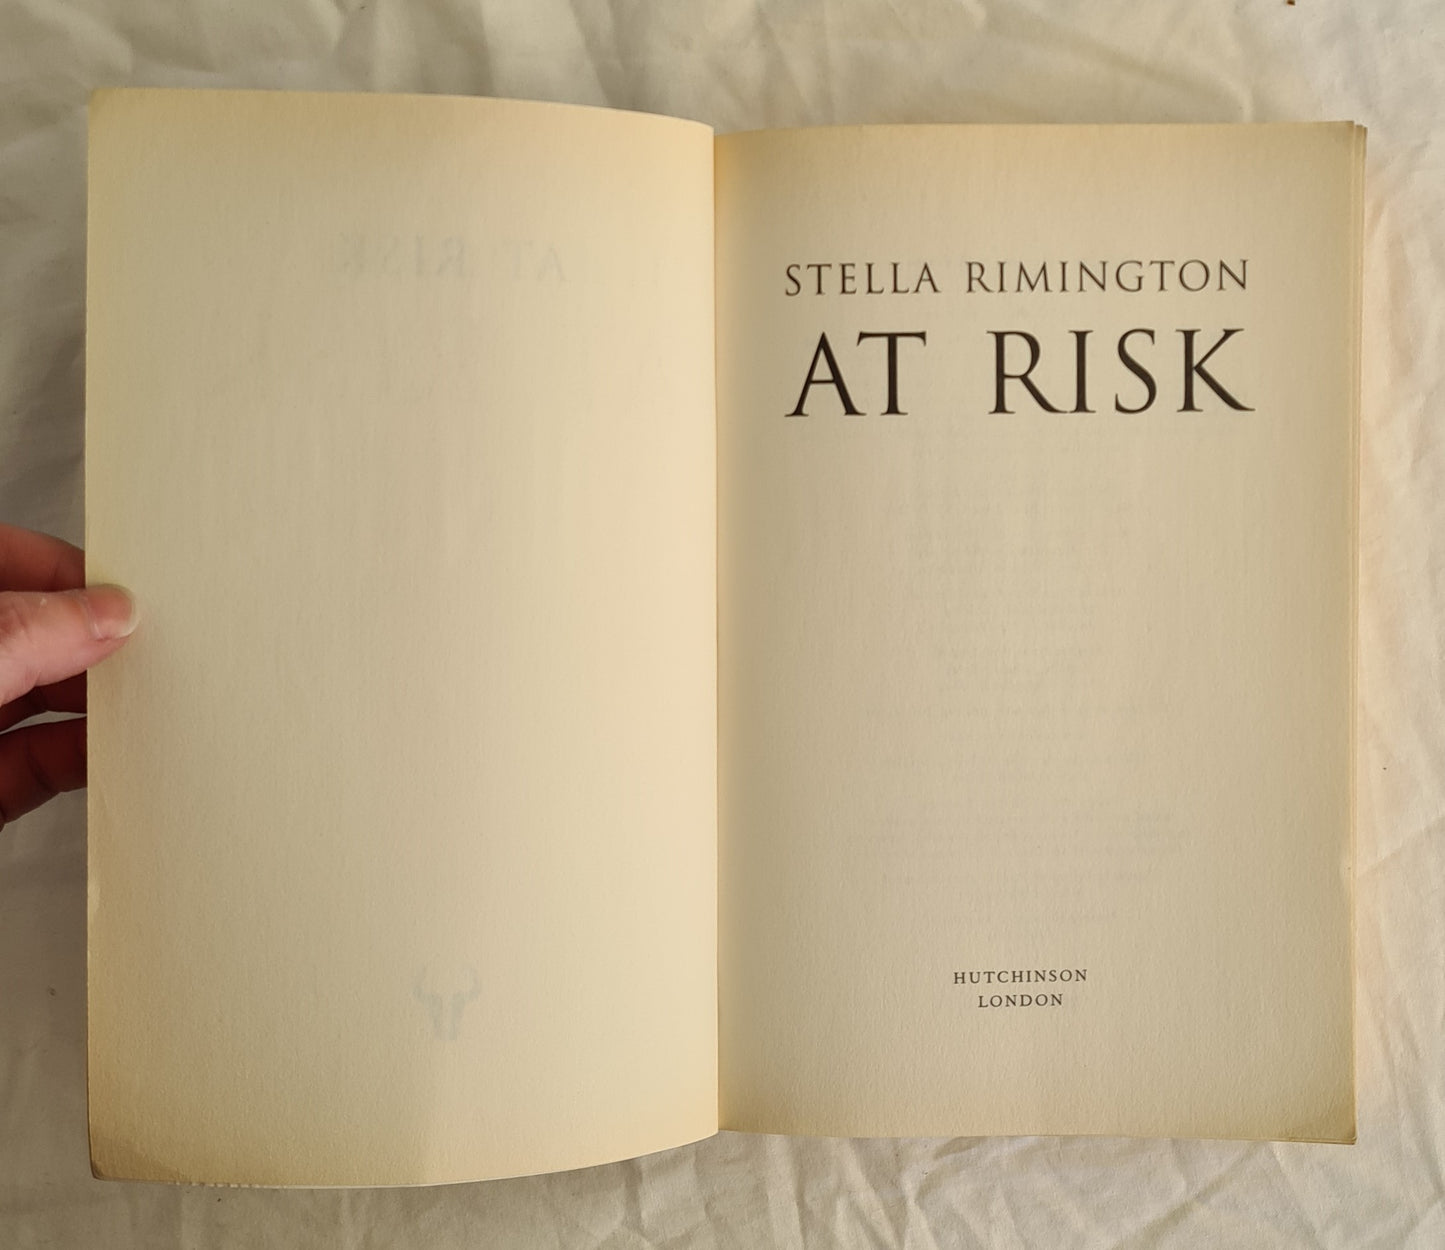 At Risk by Stella Rimingston